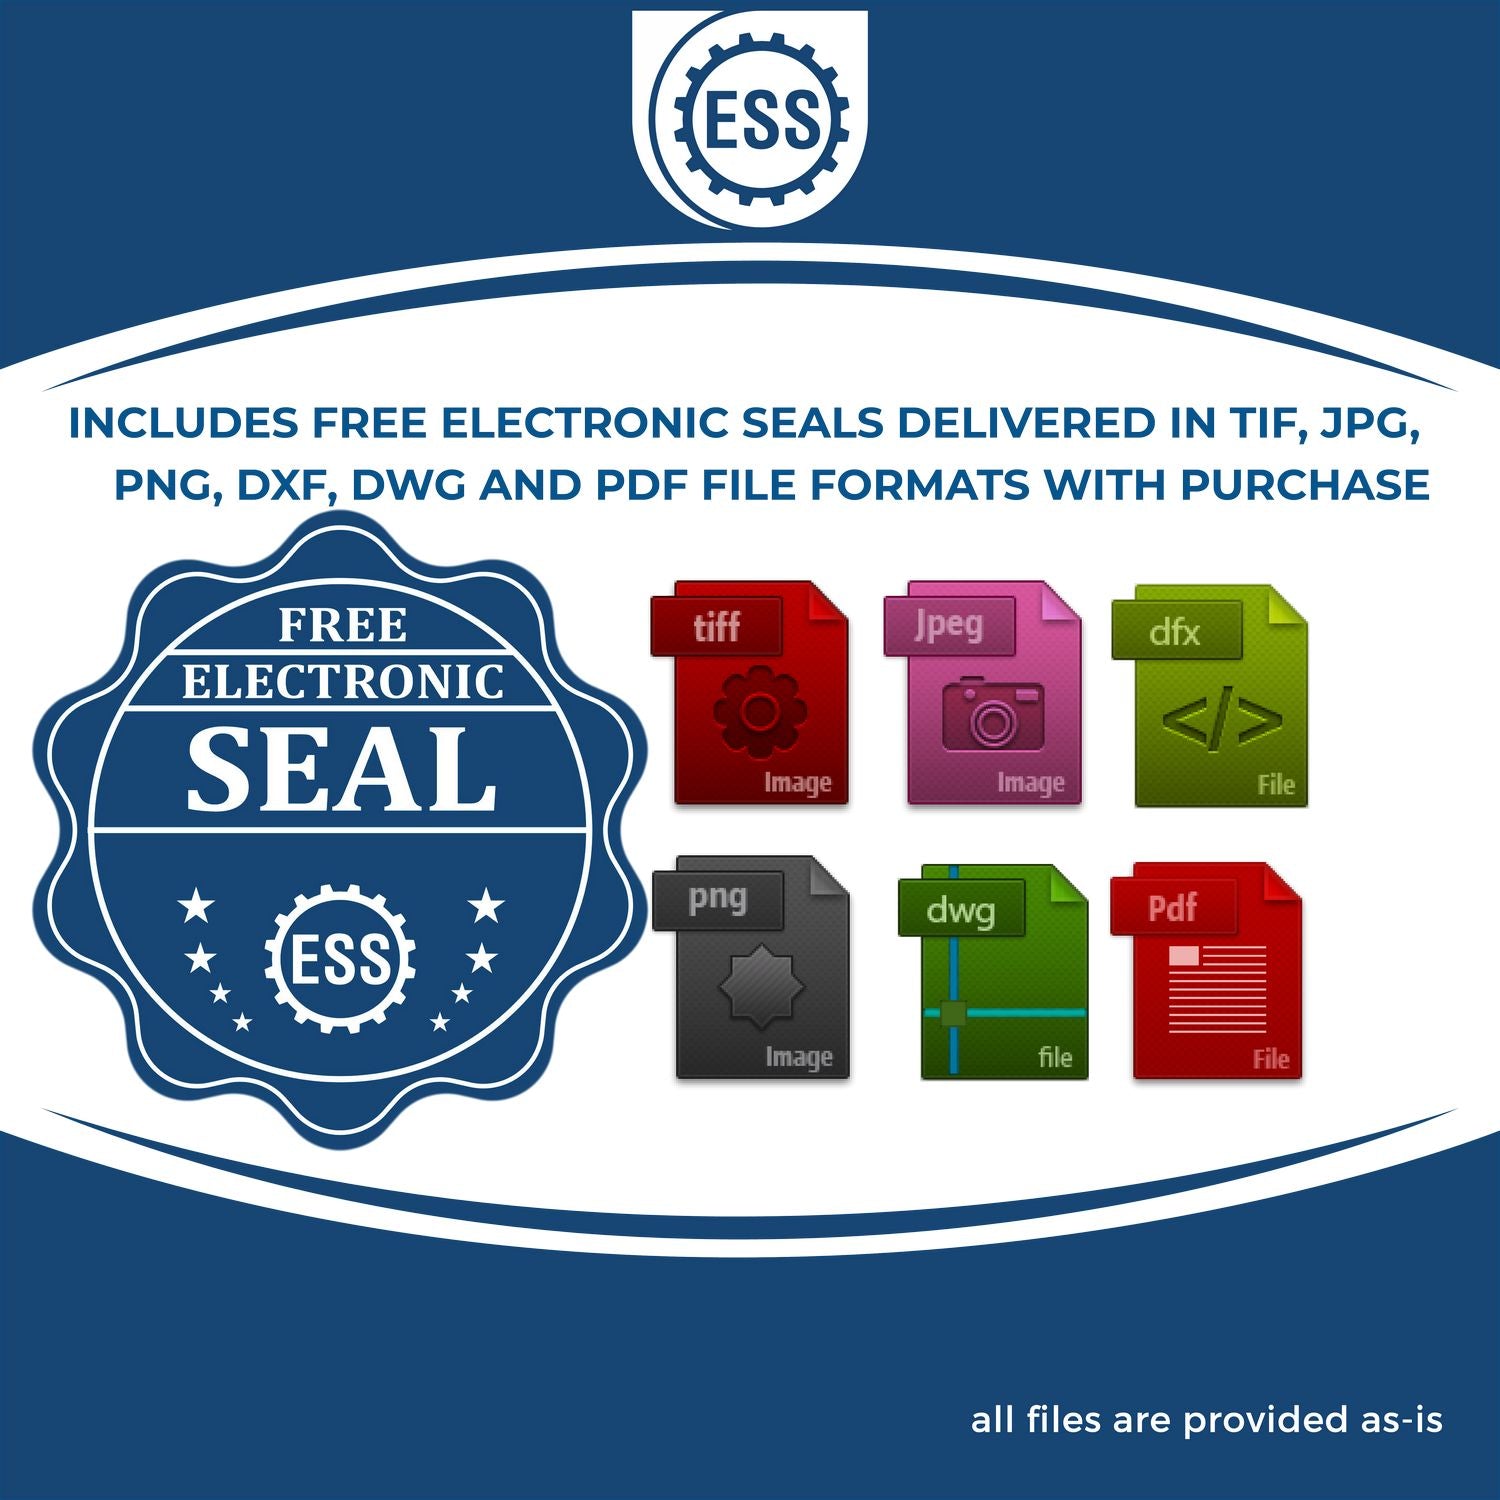 An infographic for the free electronic seal for the Long Reach Colorado PE Seal illustrating the different file type icons such as DXF, DWG, TIF, JPG and PNG.